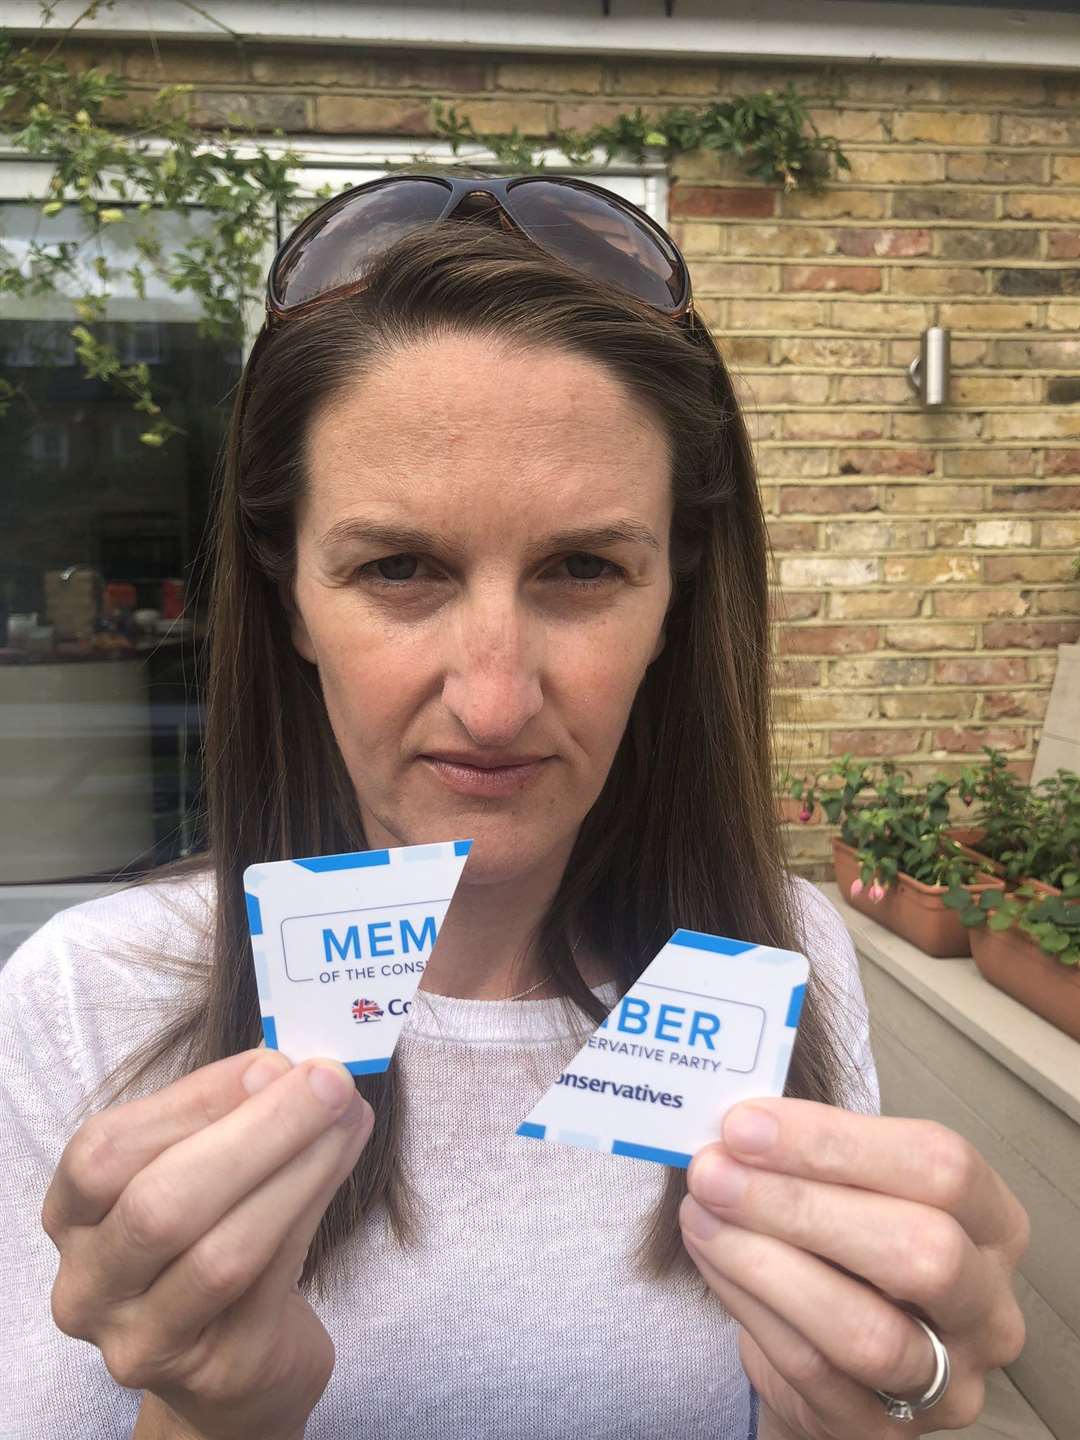 Dominey Jenner, 42, is one of multiple Conservative Party members to have cut up their membership cards in protest at Boris Johnson’s move to make face masks mandatory in shops in England (Dominey Jenner/PA)